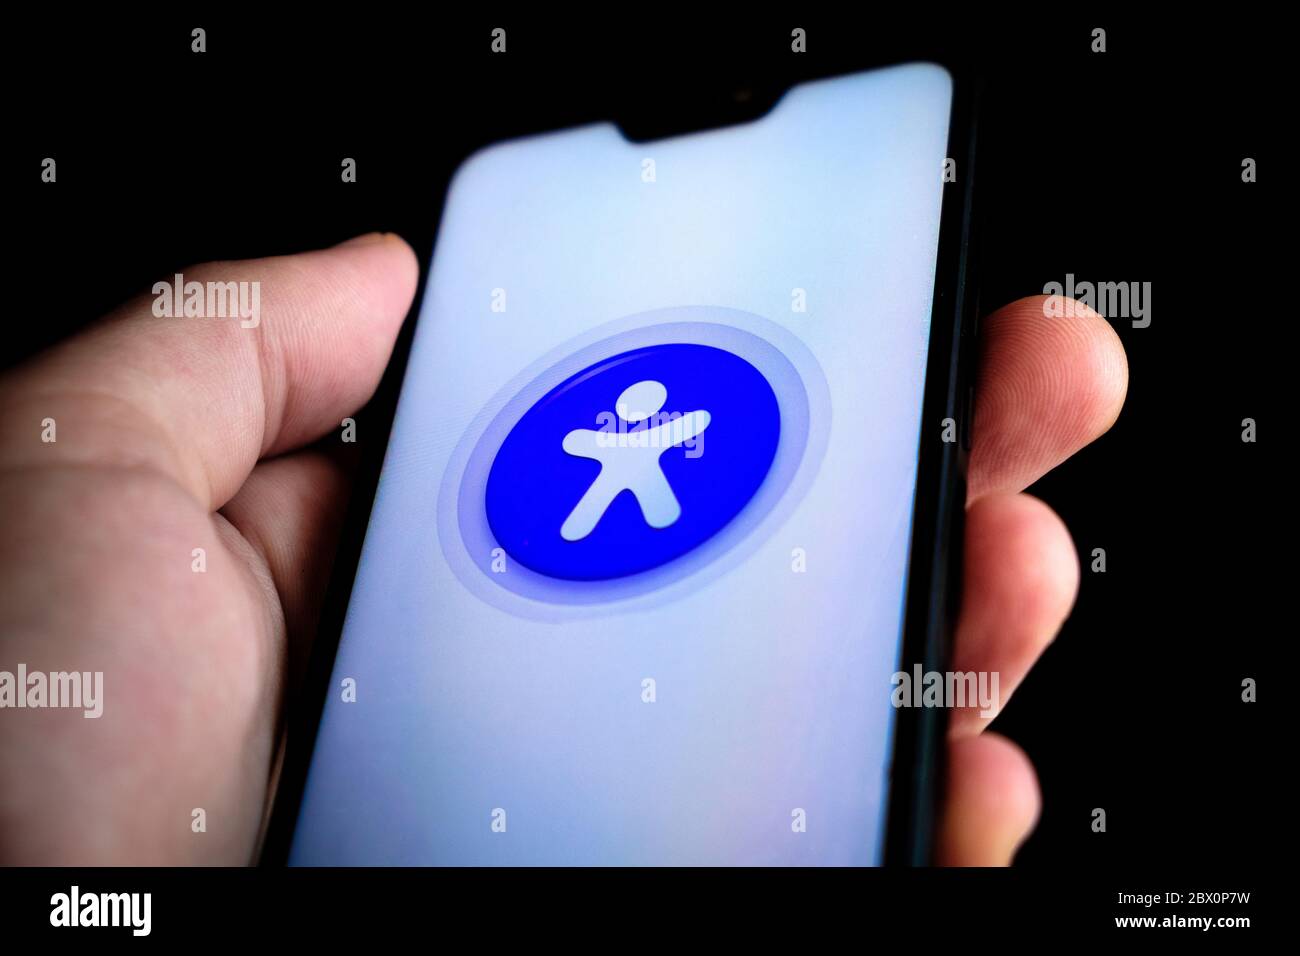 New phone app Immuni, promoted by the Italian government and developed by Bending Spoon, for contact tracing COVID-19 cases among Italy's citizens. Stock Photo